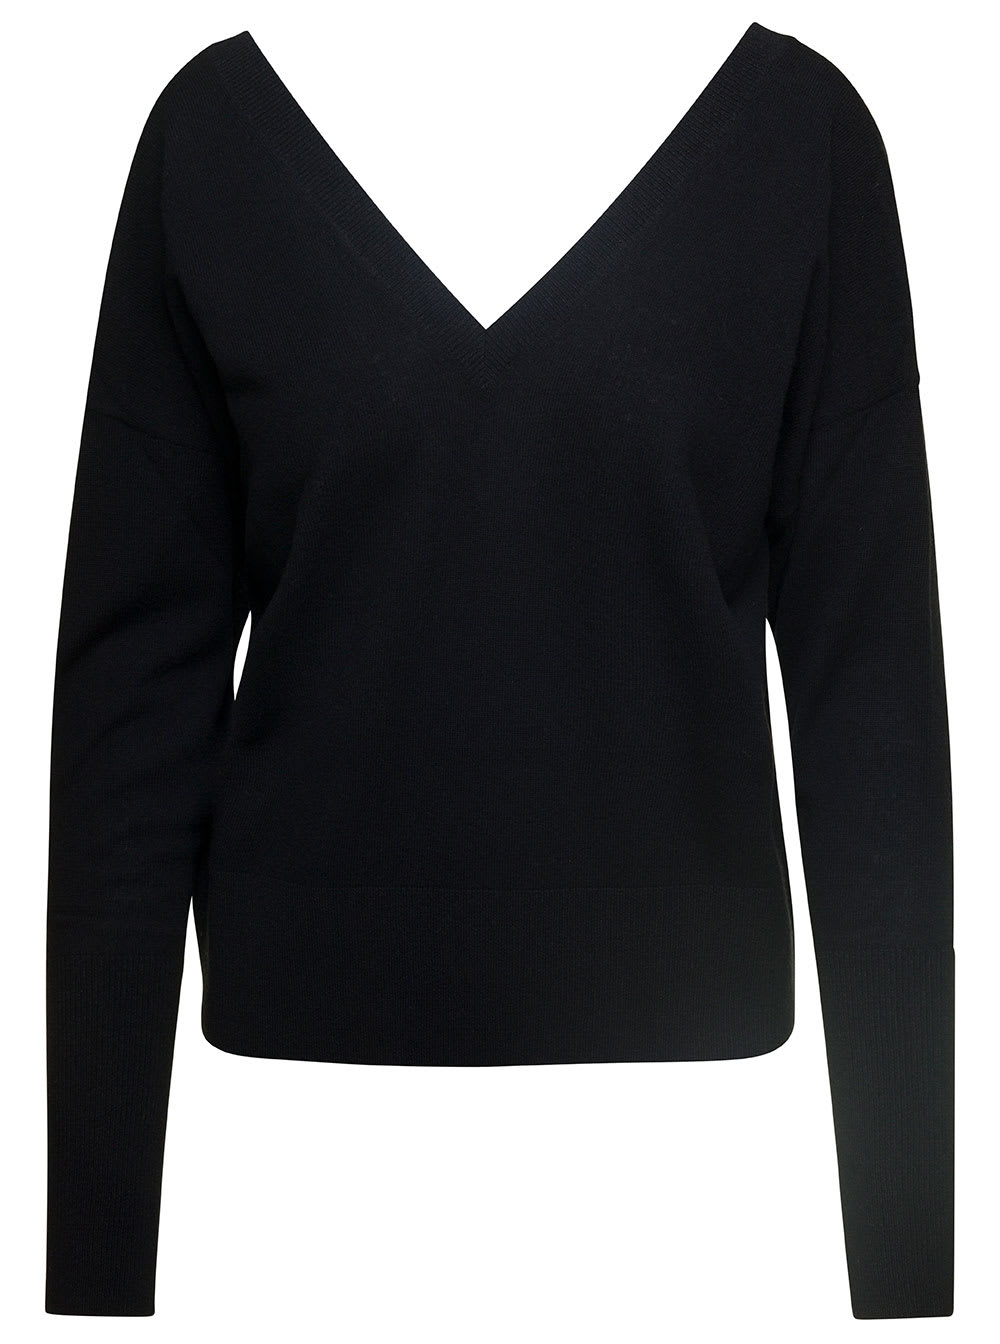 FEDERICA TOSI BLACK V NECK SWEATER IN WOOL AND CASHMERE WOMAN